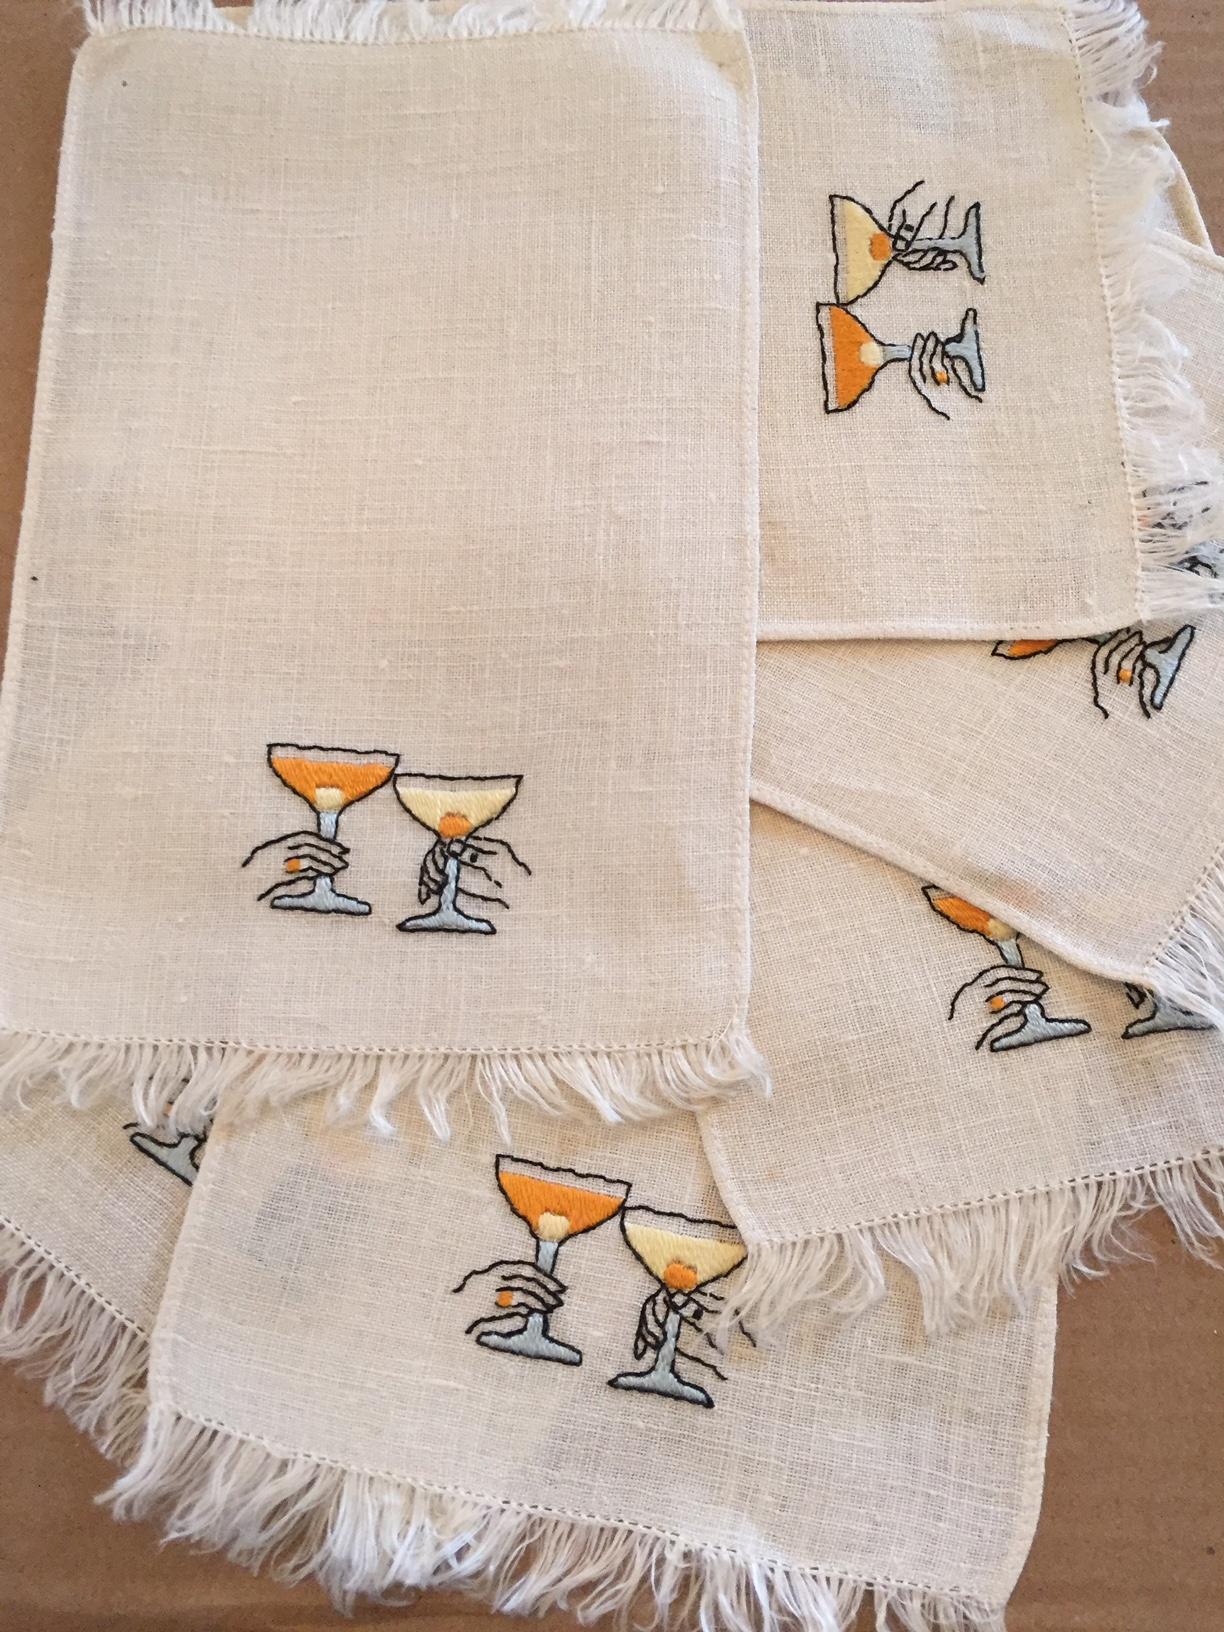 A set of six linen napkins with fringed top and bottom edges are hand embroidered with a male and female hand holding a champagne cocktail and making a toast. Cheers!
Measurements;
Height 7.5